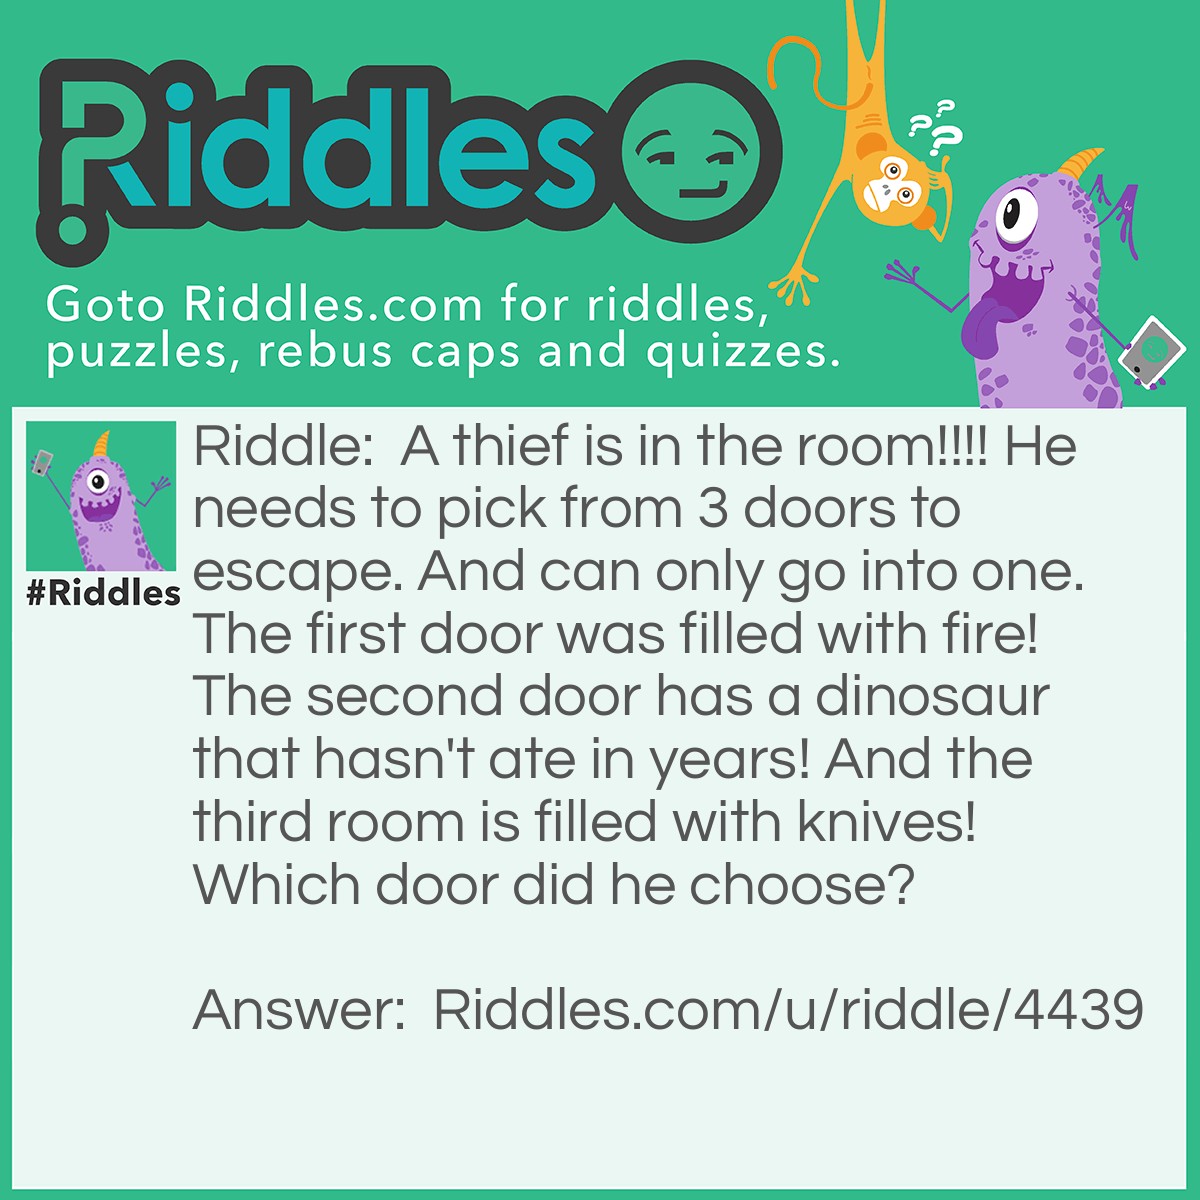 Riddle: A thief is in the room!!!! He needs to pick from 3 doors to escape. And can only go into one. The first door was filled with fire! The second door has a dinosaur that hasn't ate in years! And the third room is filled with knives! Which door did he choose? Answer: The thief chose the second door. The dinosaur hasn't ate in years which means he would already be dead!